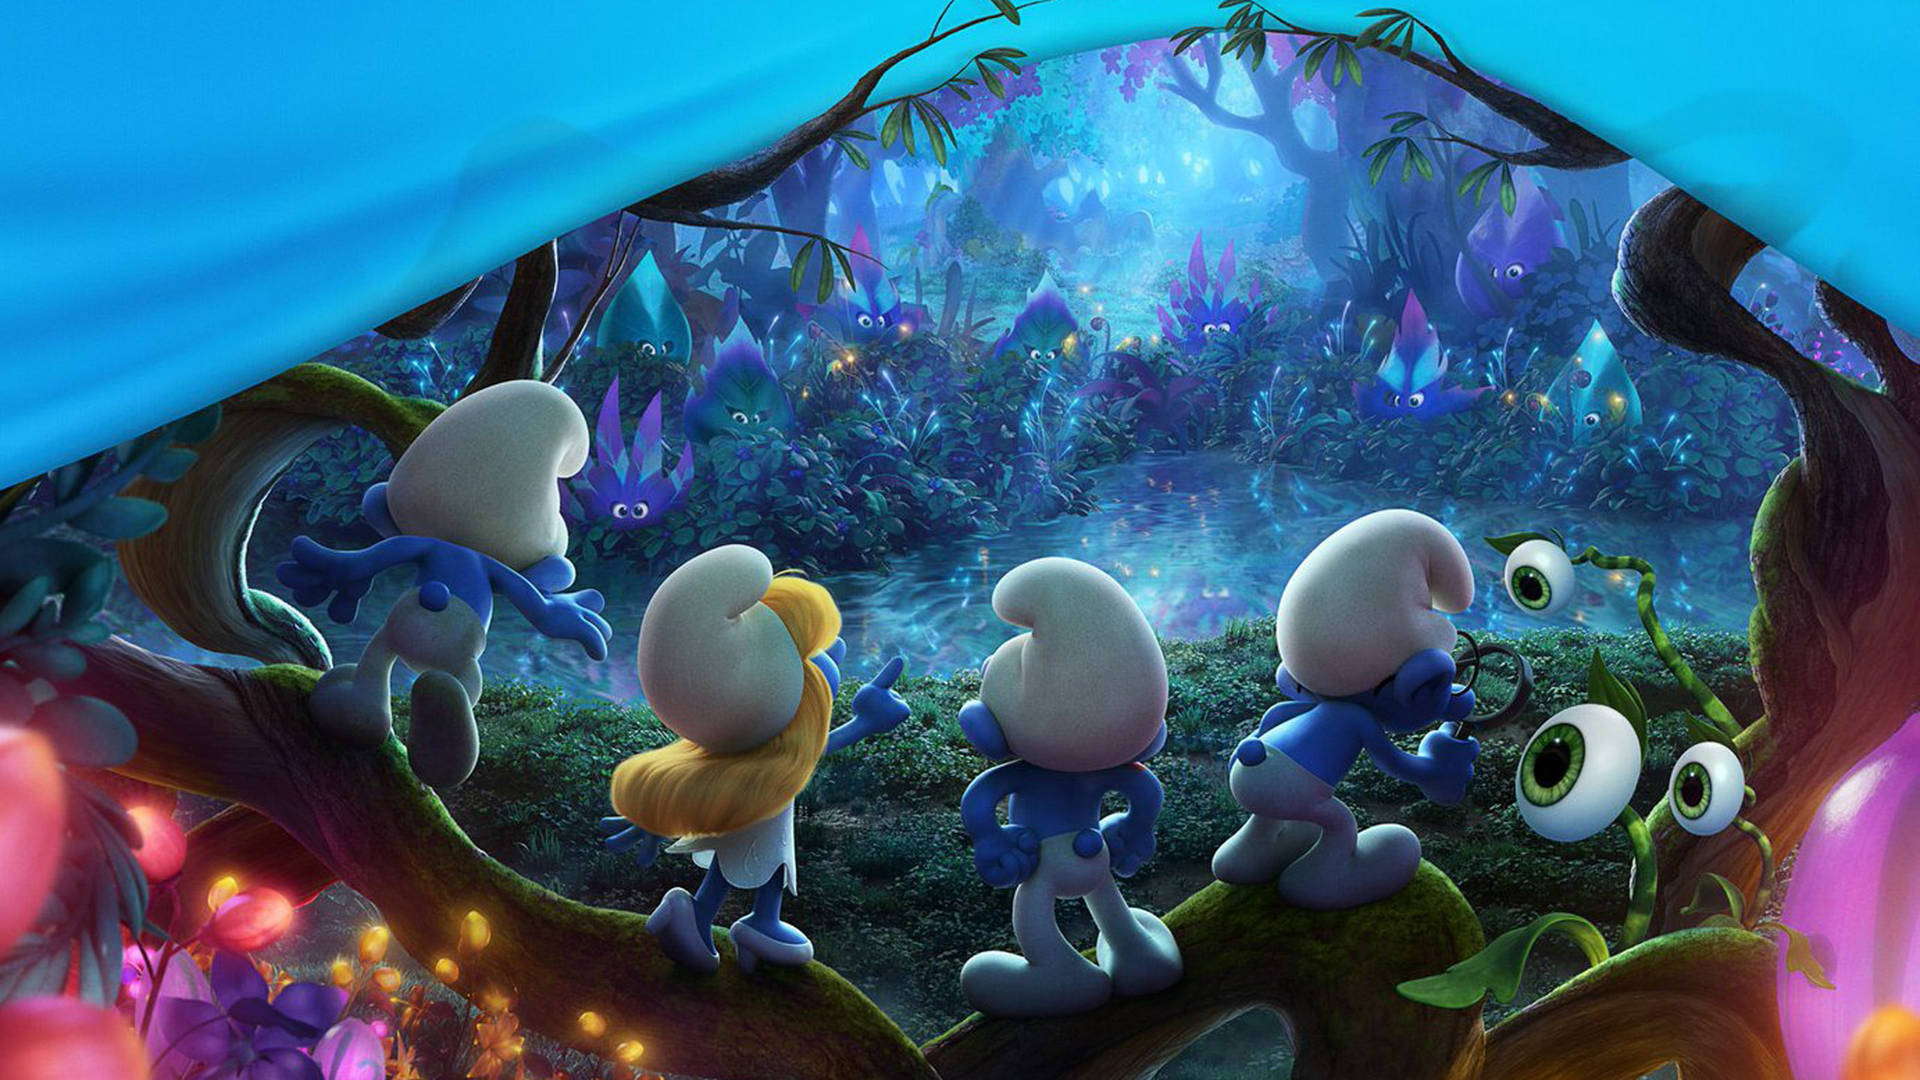 The Smurfs Magical Lost Village